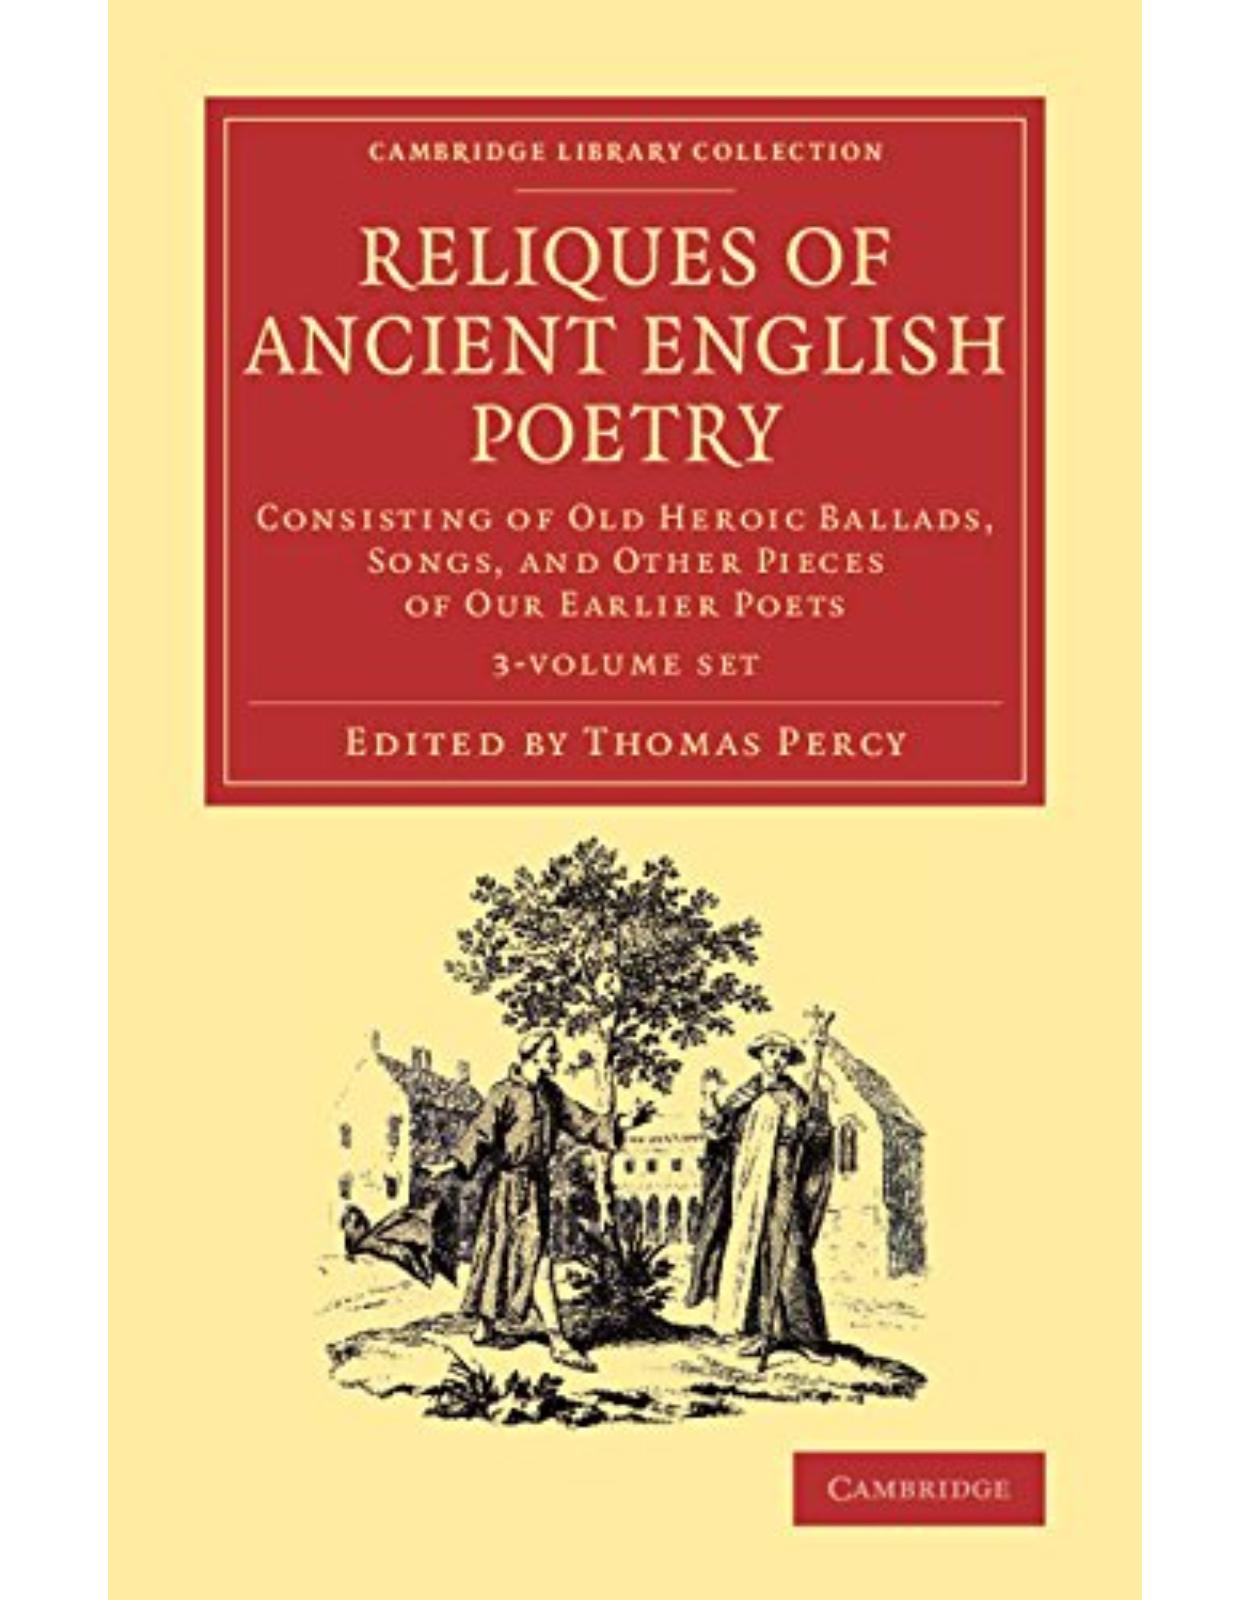 Reliques of Ancient English Poetry 3 Volume Set: Volume 1: Consisting of Old Heroic Ballads, Songs, and Other Pieces of our Earlier Poets (Cambridge Library Collection - Literary Studies)